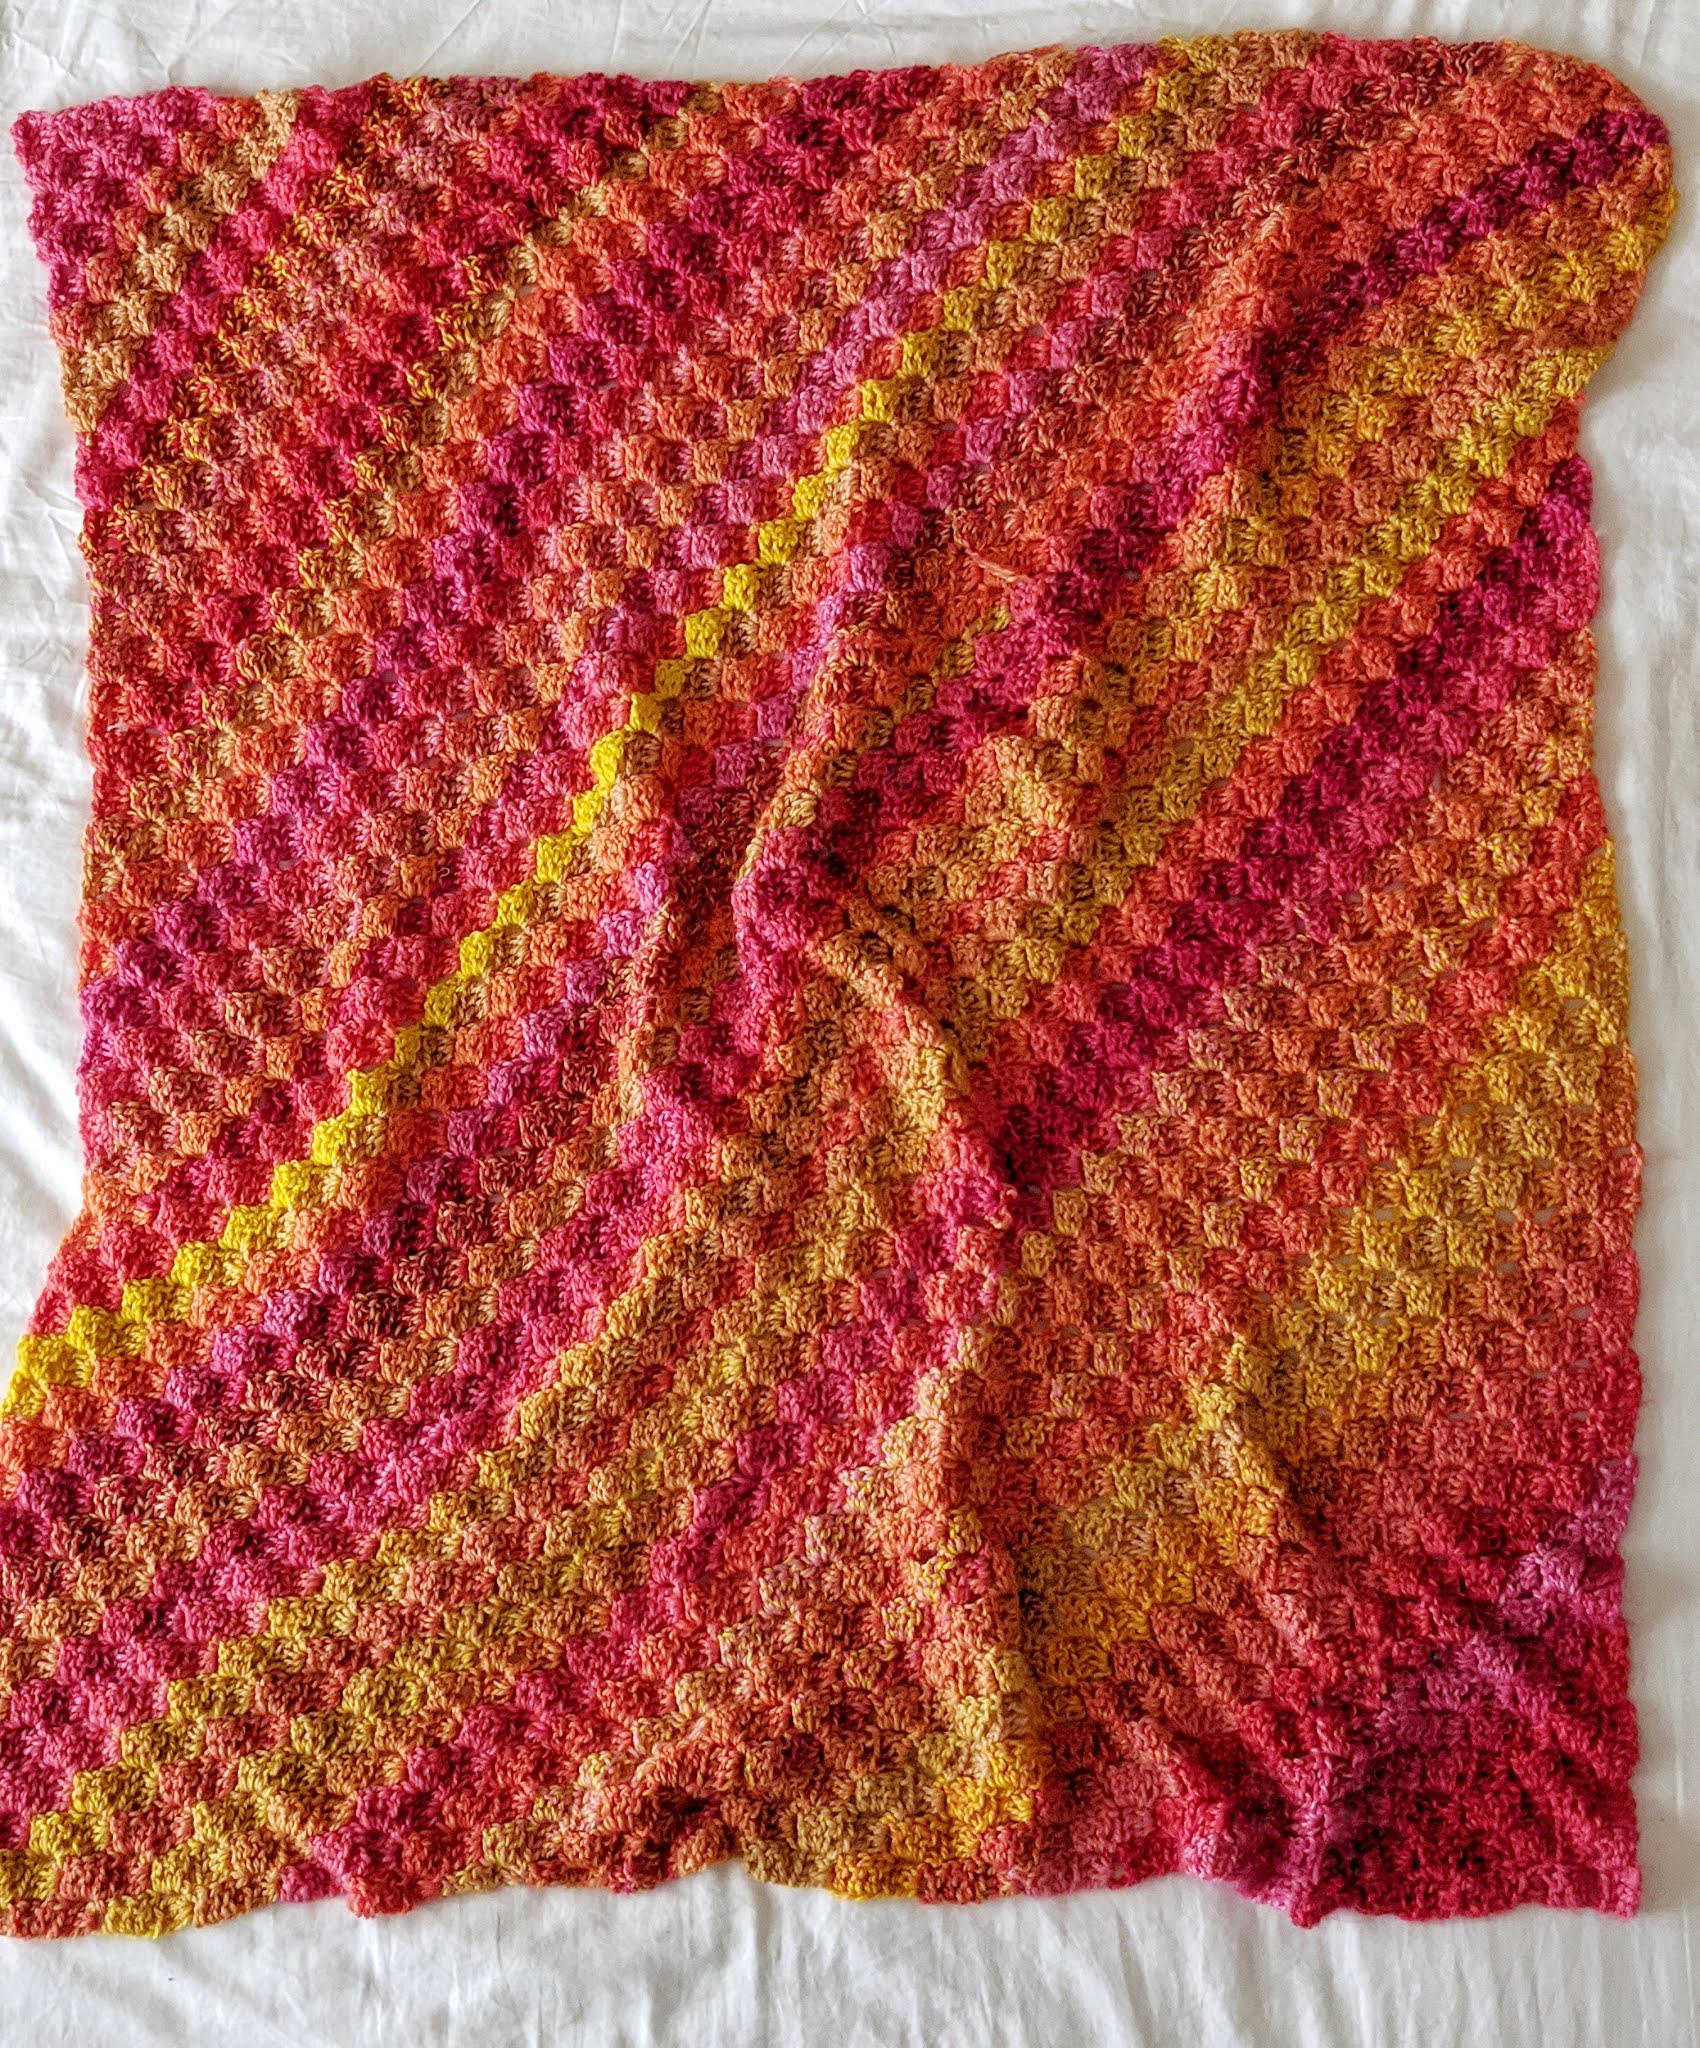 Finished my first blanket! C2C using Red Heart Neon Stripes. Still